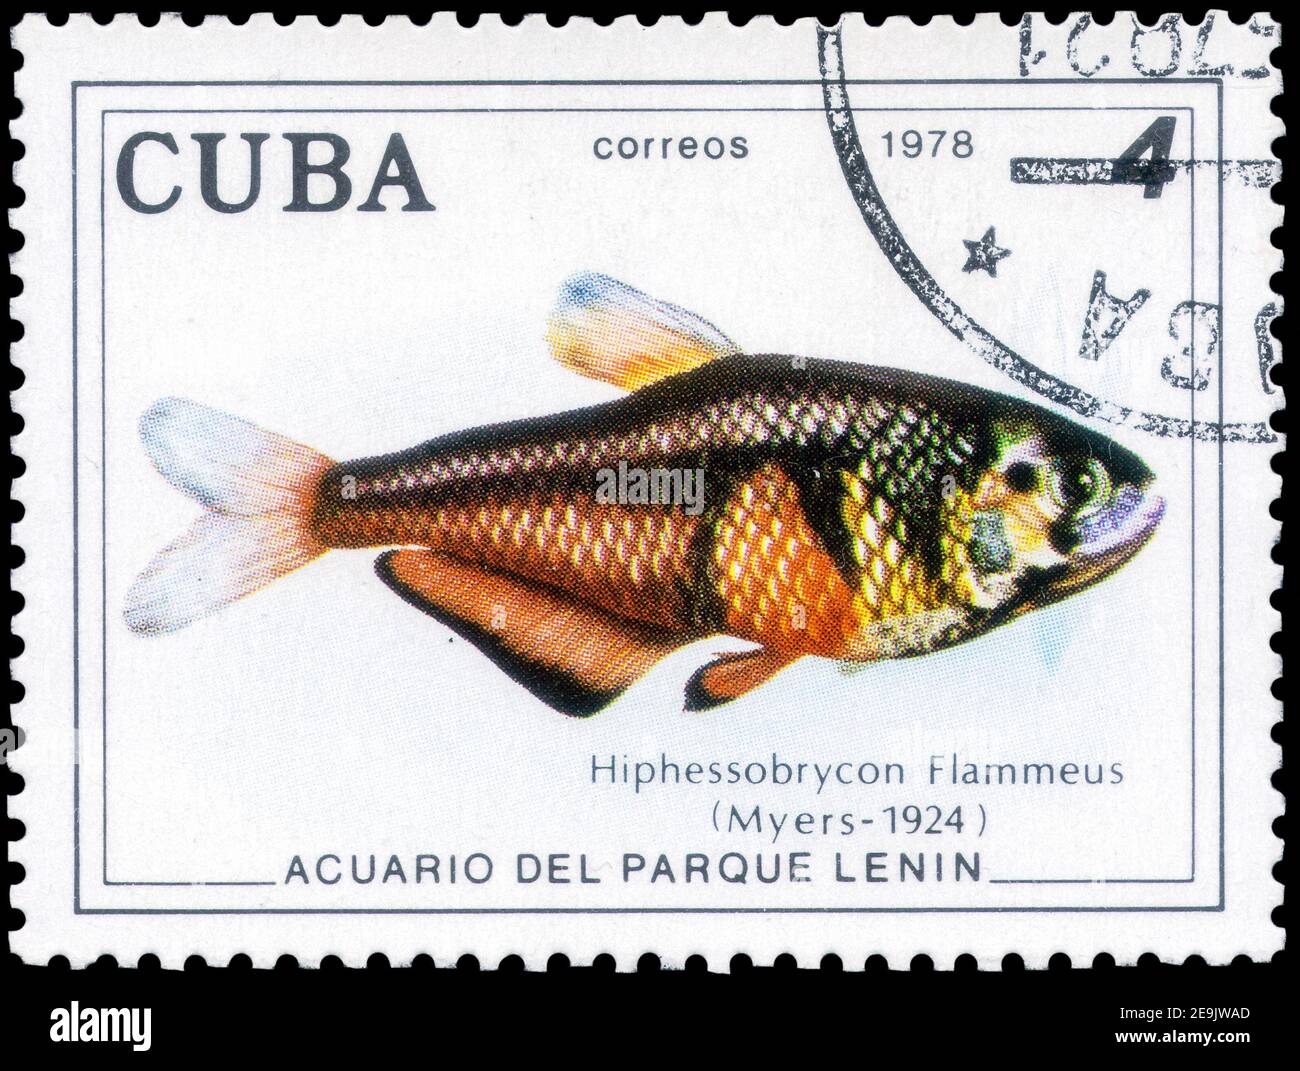 Saint Petersburg, Russia - December 05, 2020: Stamp printed in the Cuba with the image of the Rio Flame Tetra, Hyphessobrycon flammeus, circa 1977 Stock Photo